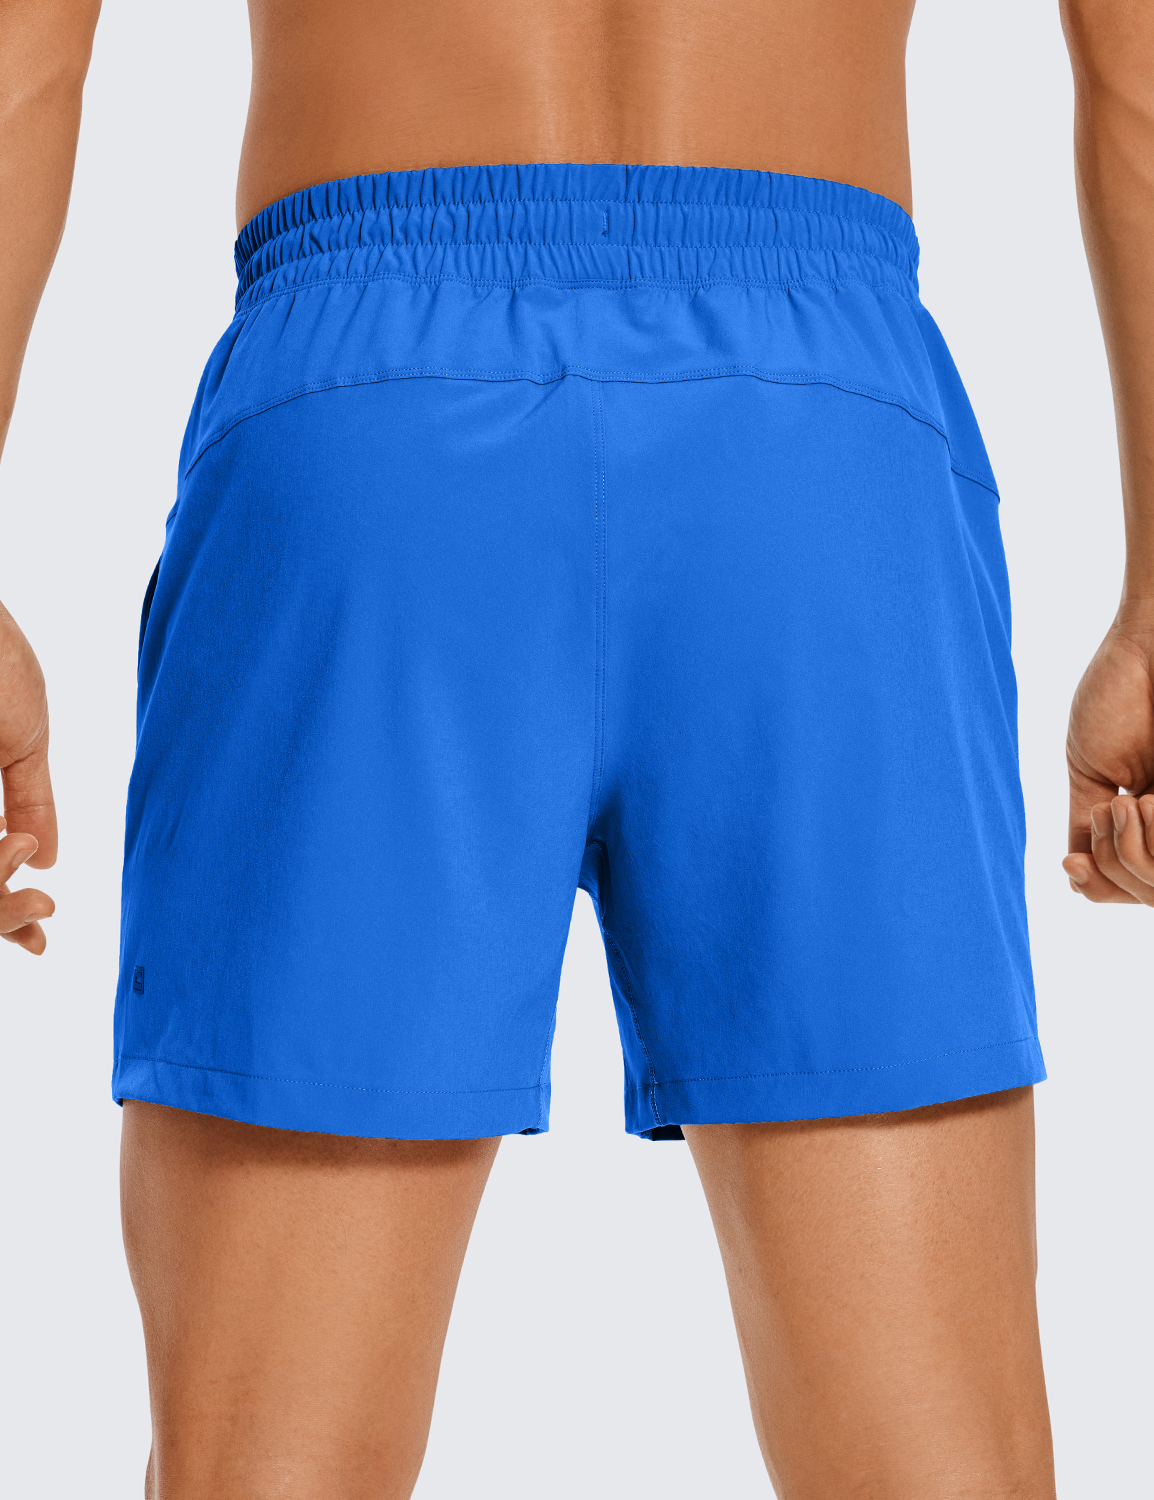 CRZ YOGA Women's Train Feathery-Fit Mid-Rise Lined Shorts 4